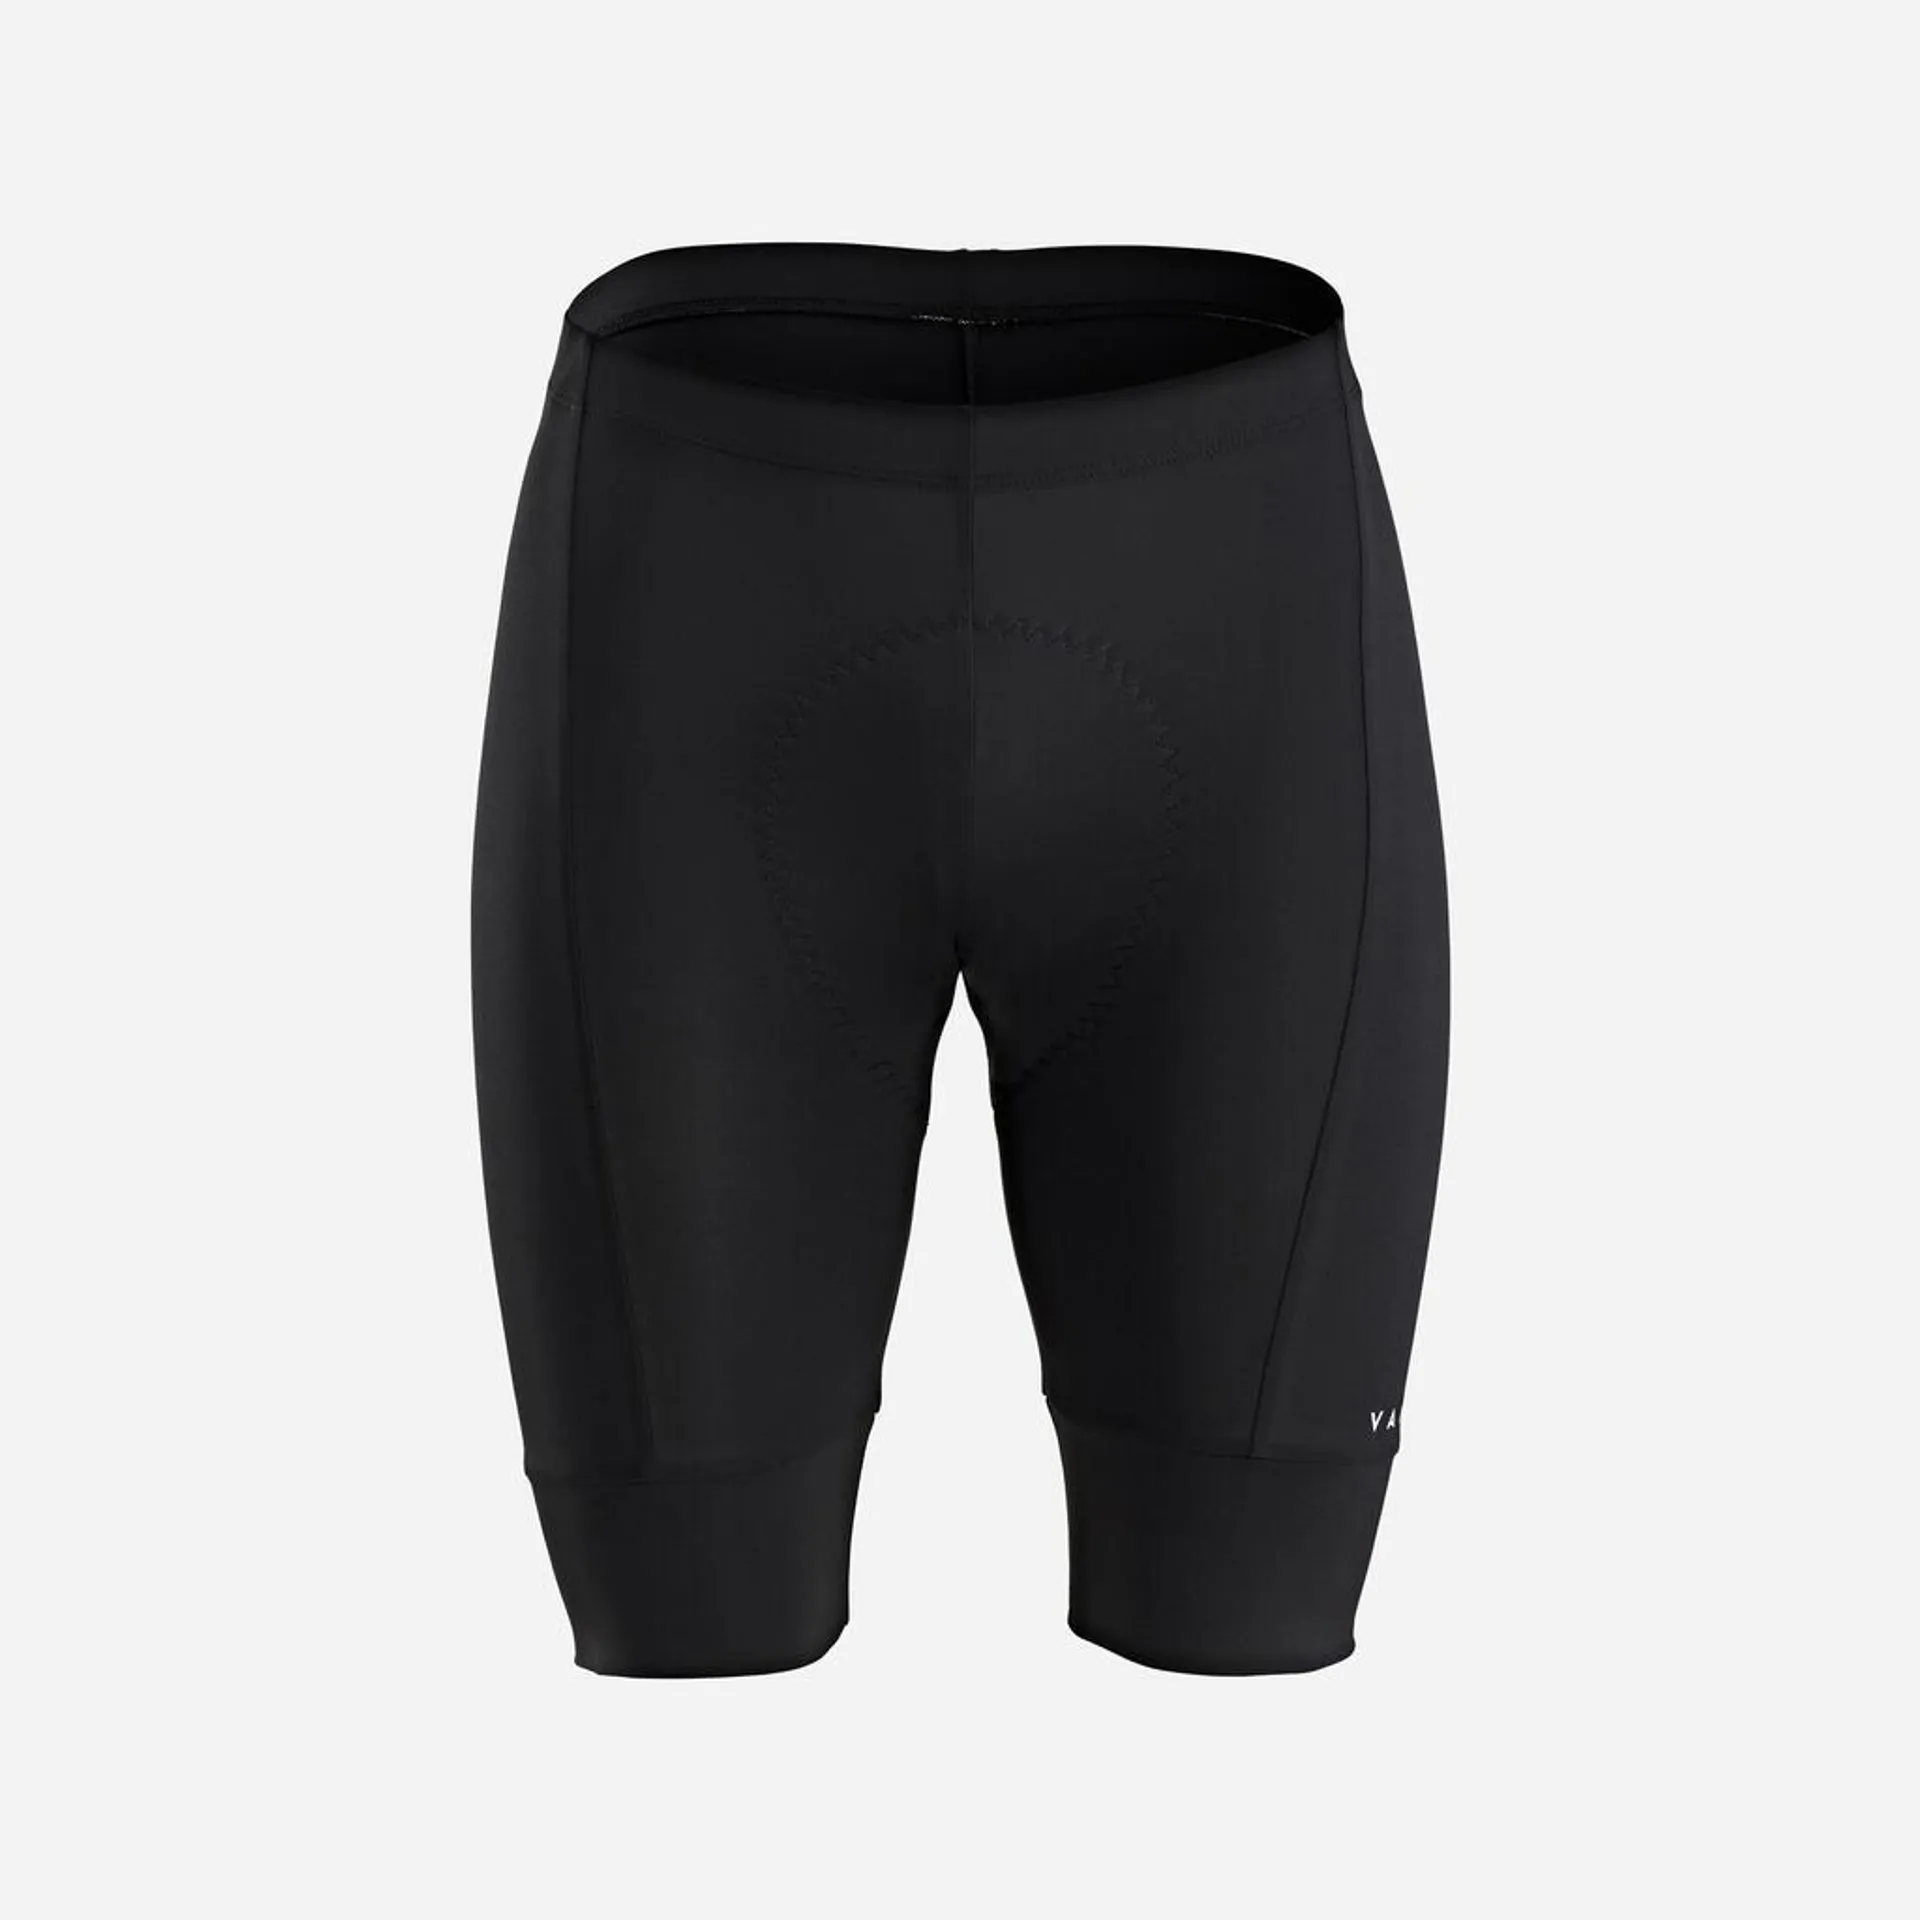 Essential Men's Road Cycling Bibless Shorts